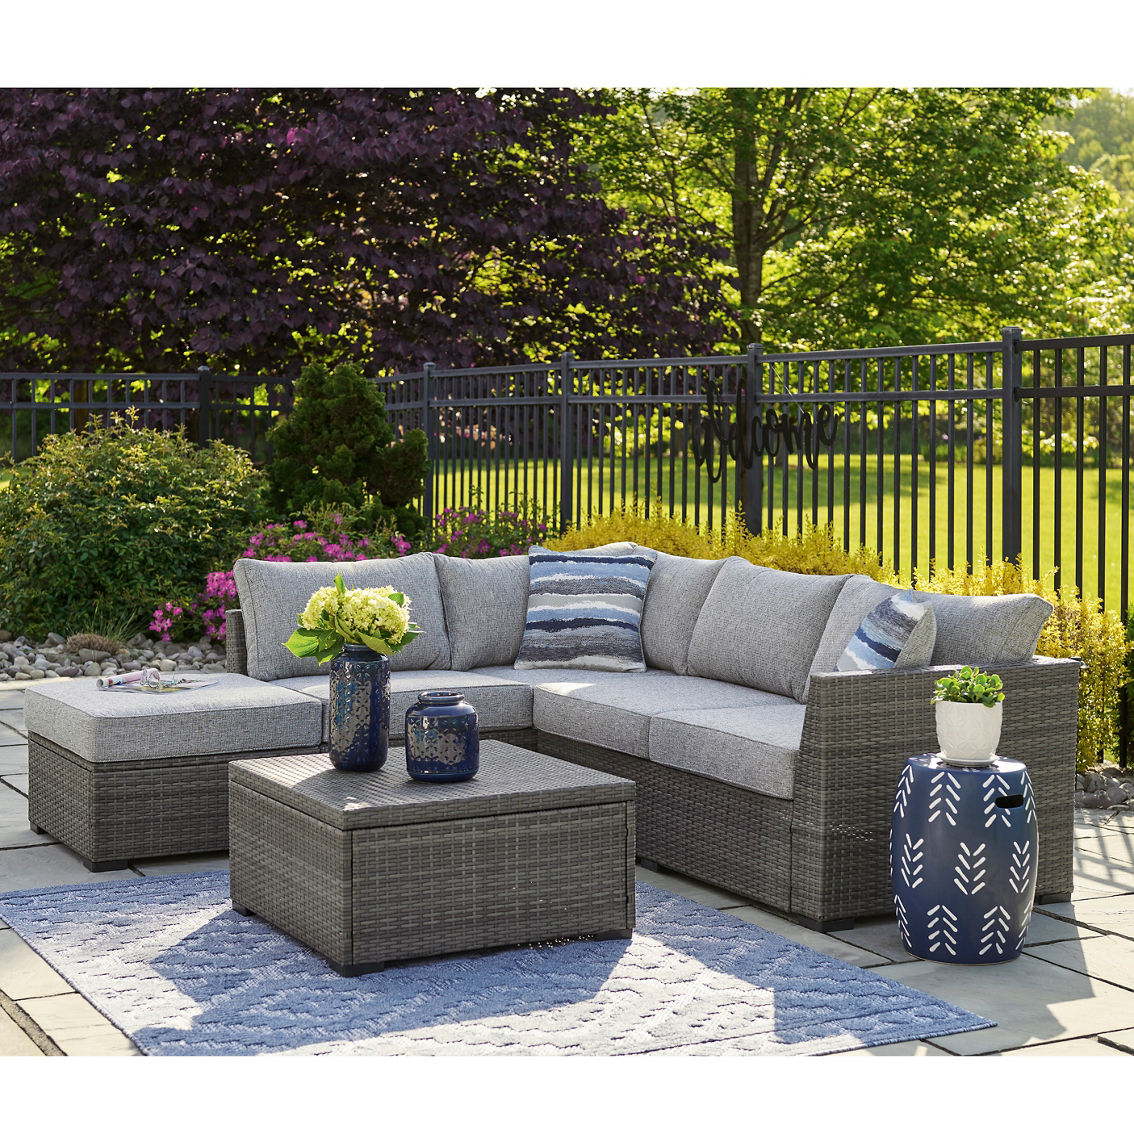 Signature Design by Ashley Petal Road 4 pc. Outdoor Sectional Set - Image 2 of 3